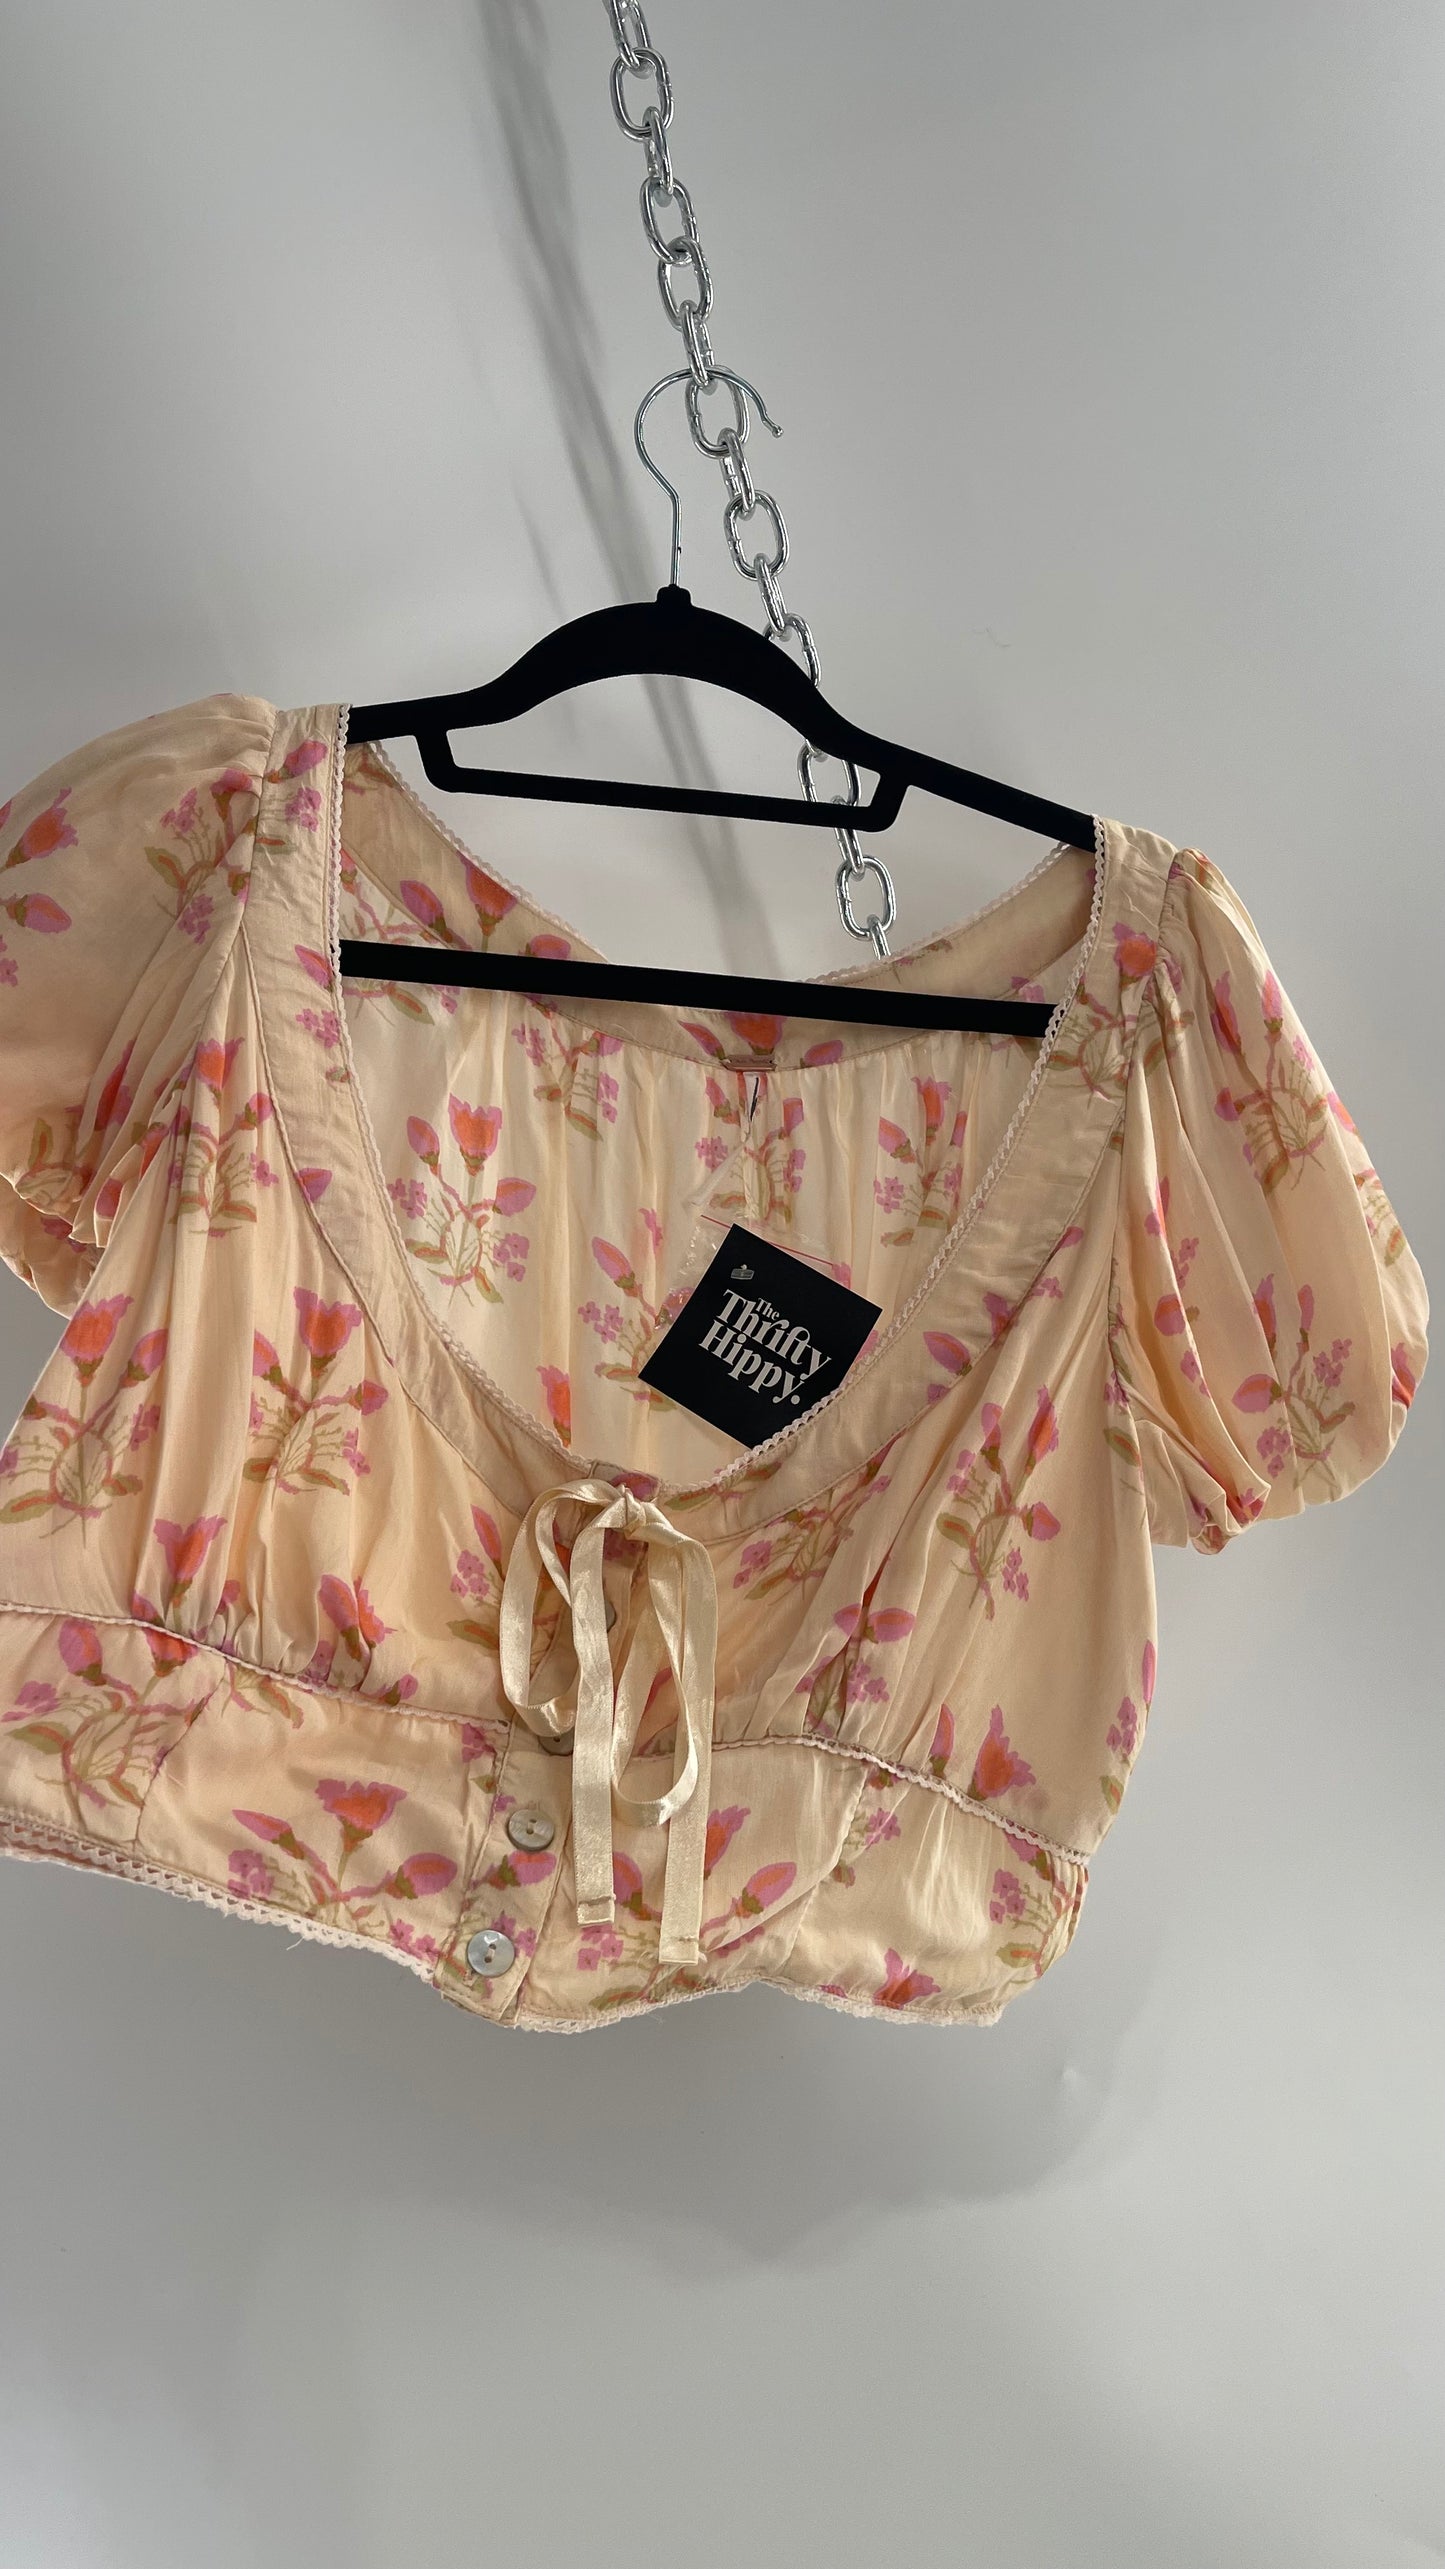 Free People Baby Pink Bustier Cropped Short Sleeve Top with Milkmaid Bustline, Floral Pattern and Ribbon Bow Detail (Large)